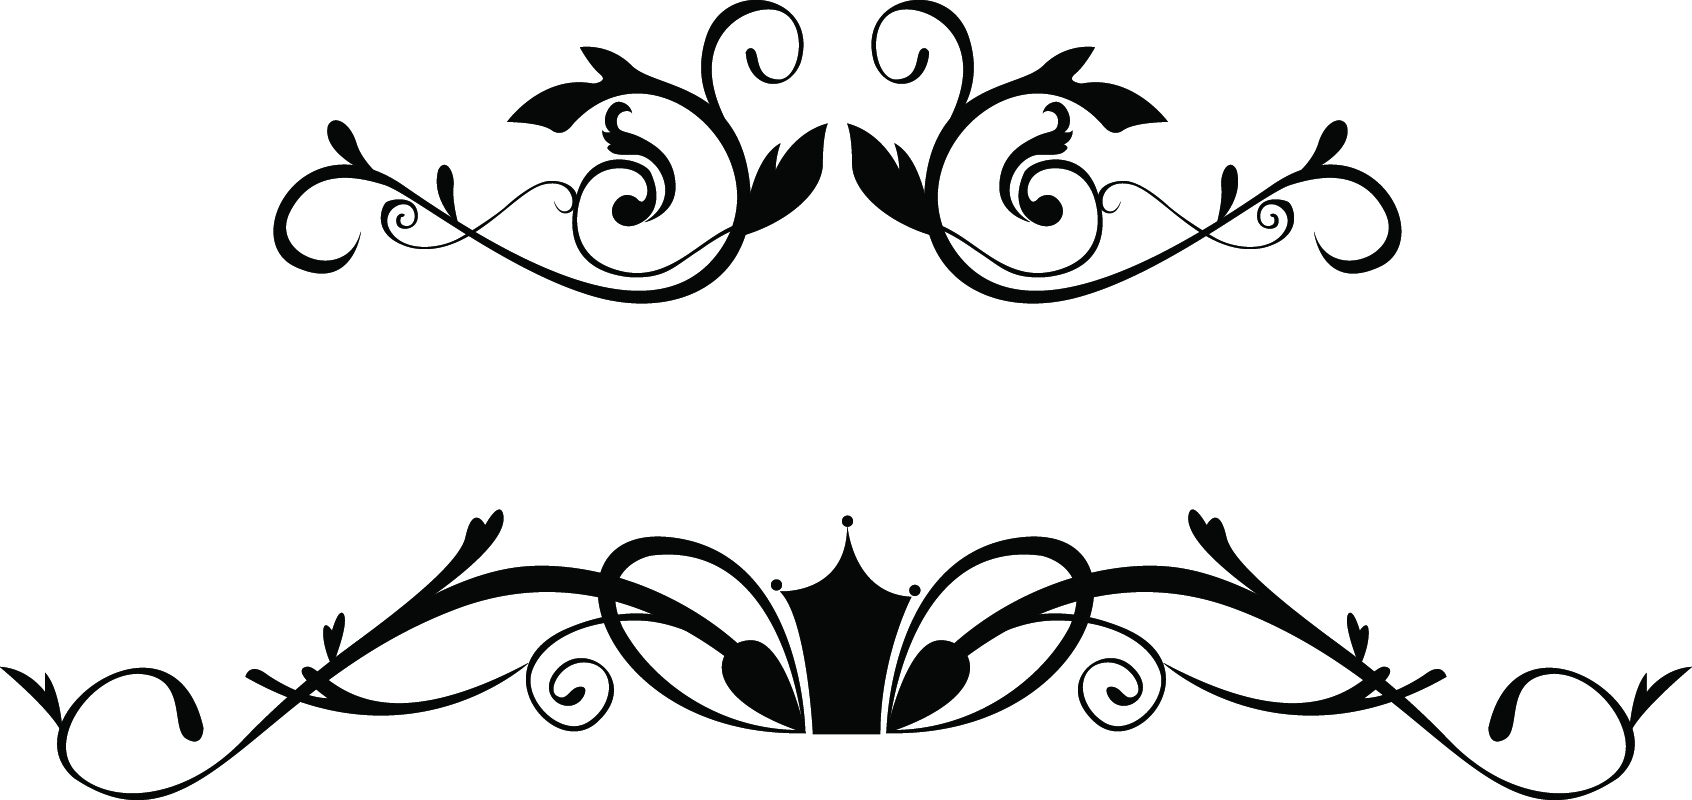 Download Floral Ornaments (.eps) Free Vector Download - 3axis.co